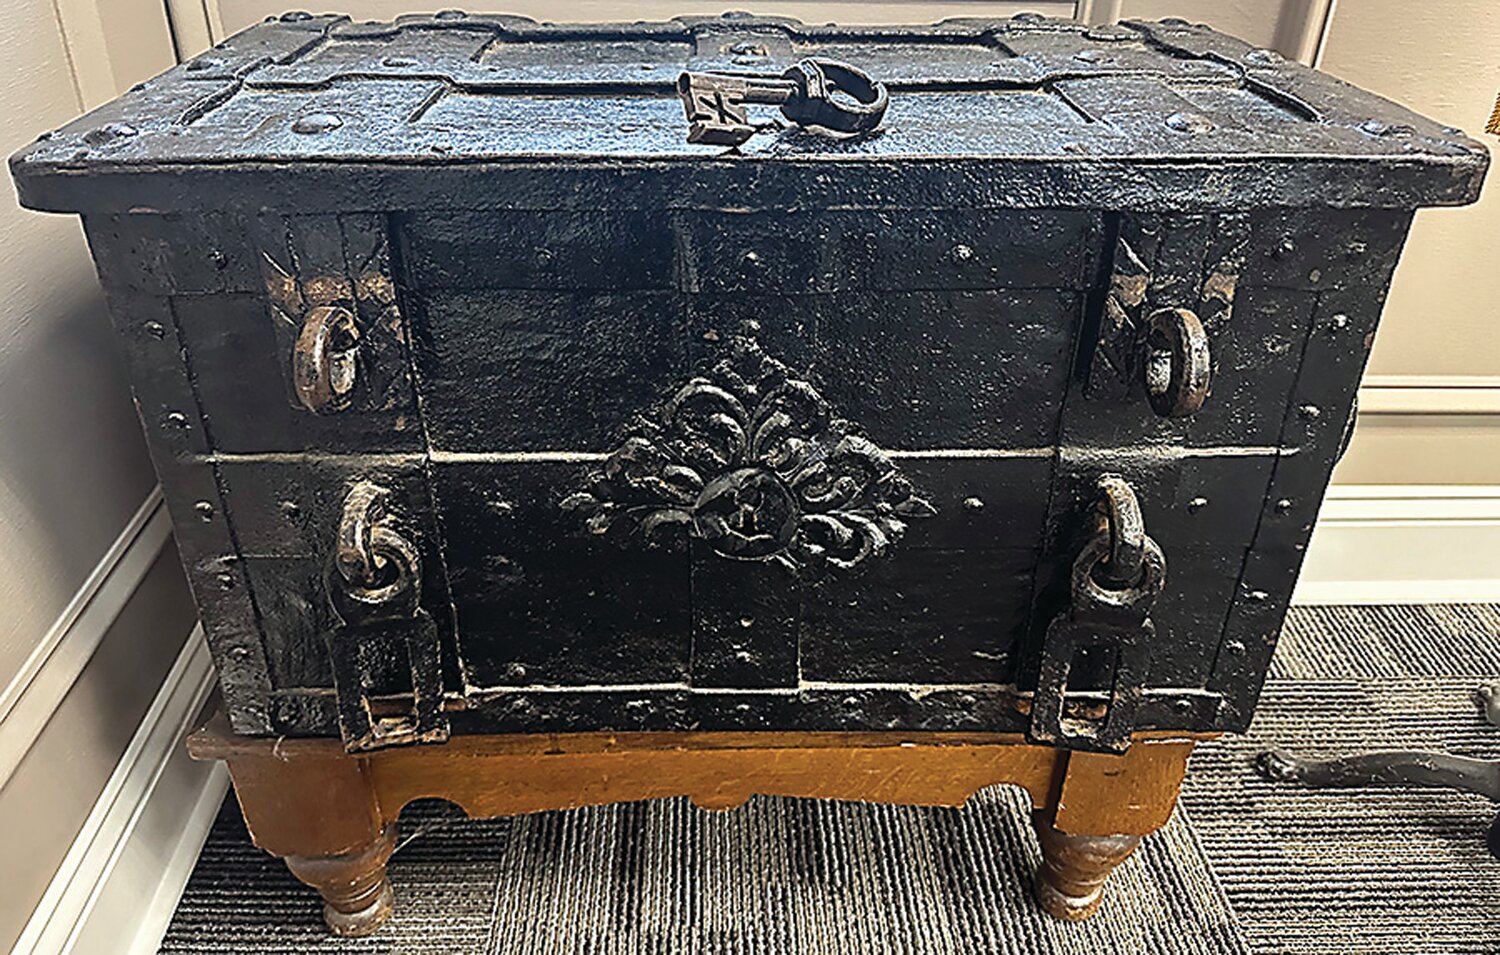 This iron strongbox was used to help transport the Farmers Bank of Bucks County’s belongings from Hulmeville to its new home in Bristol. It now sits in Hulmeville Borough Hall.